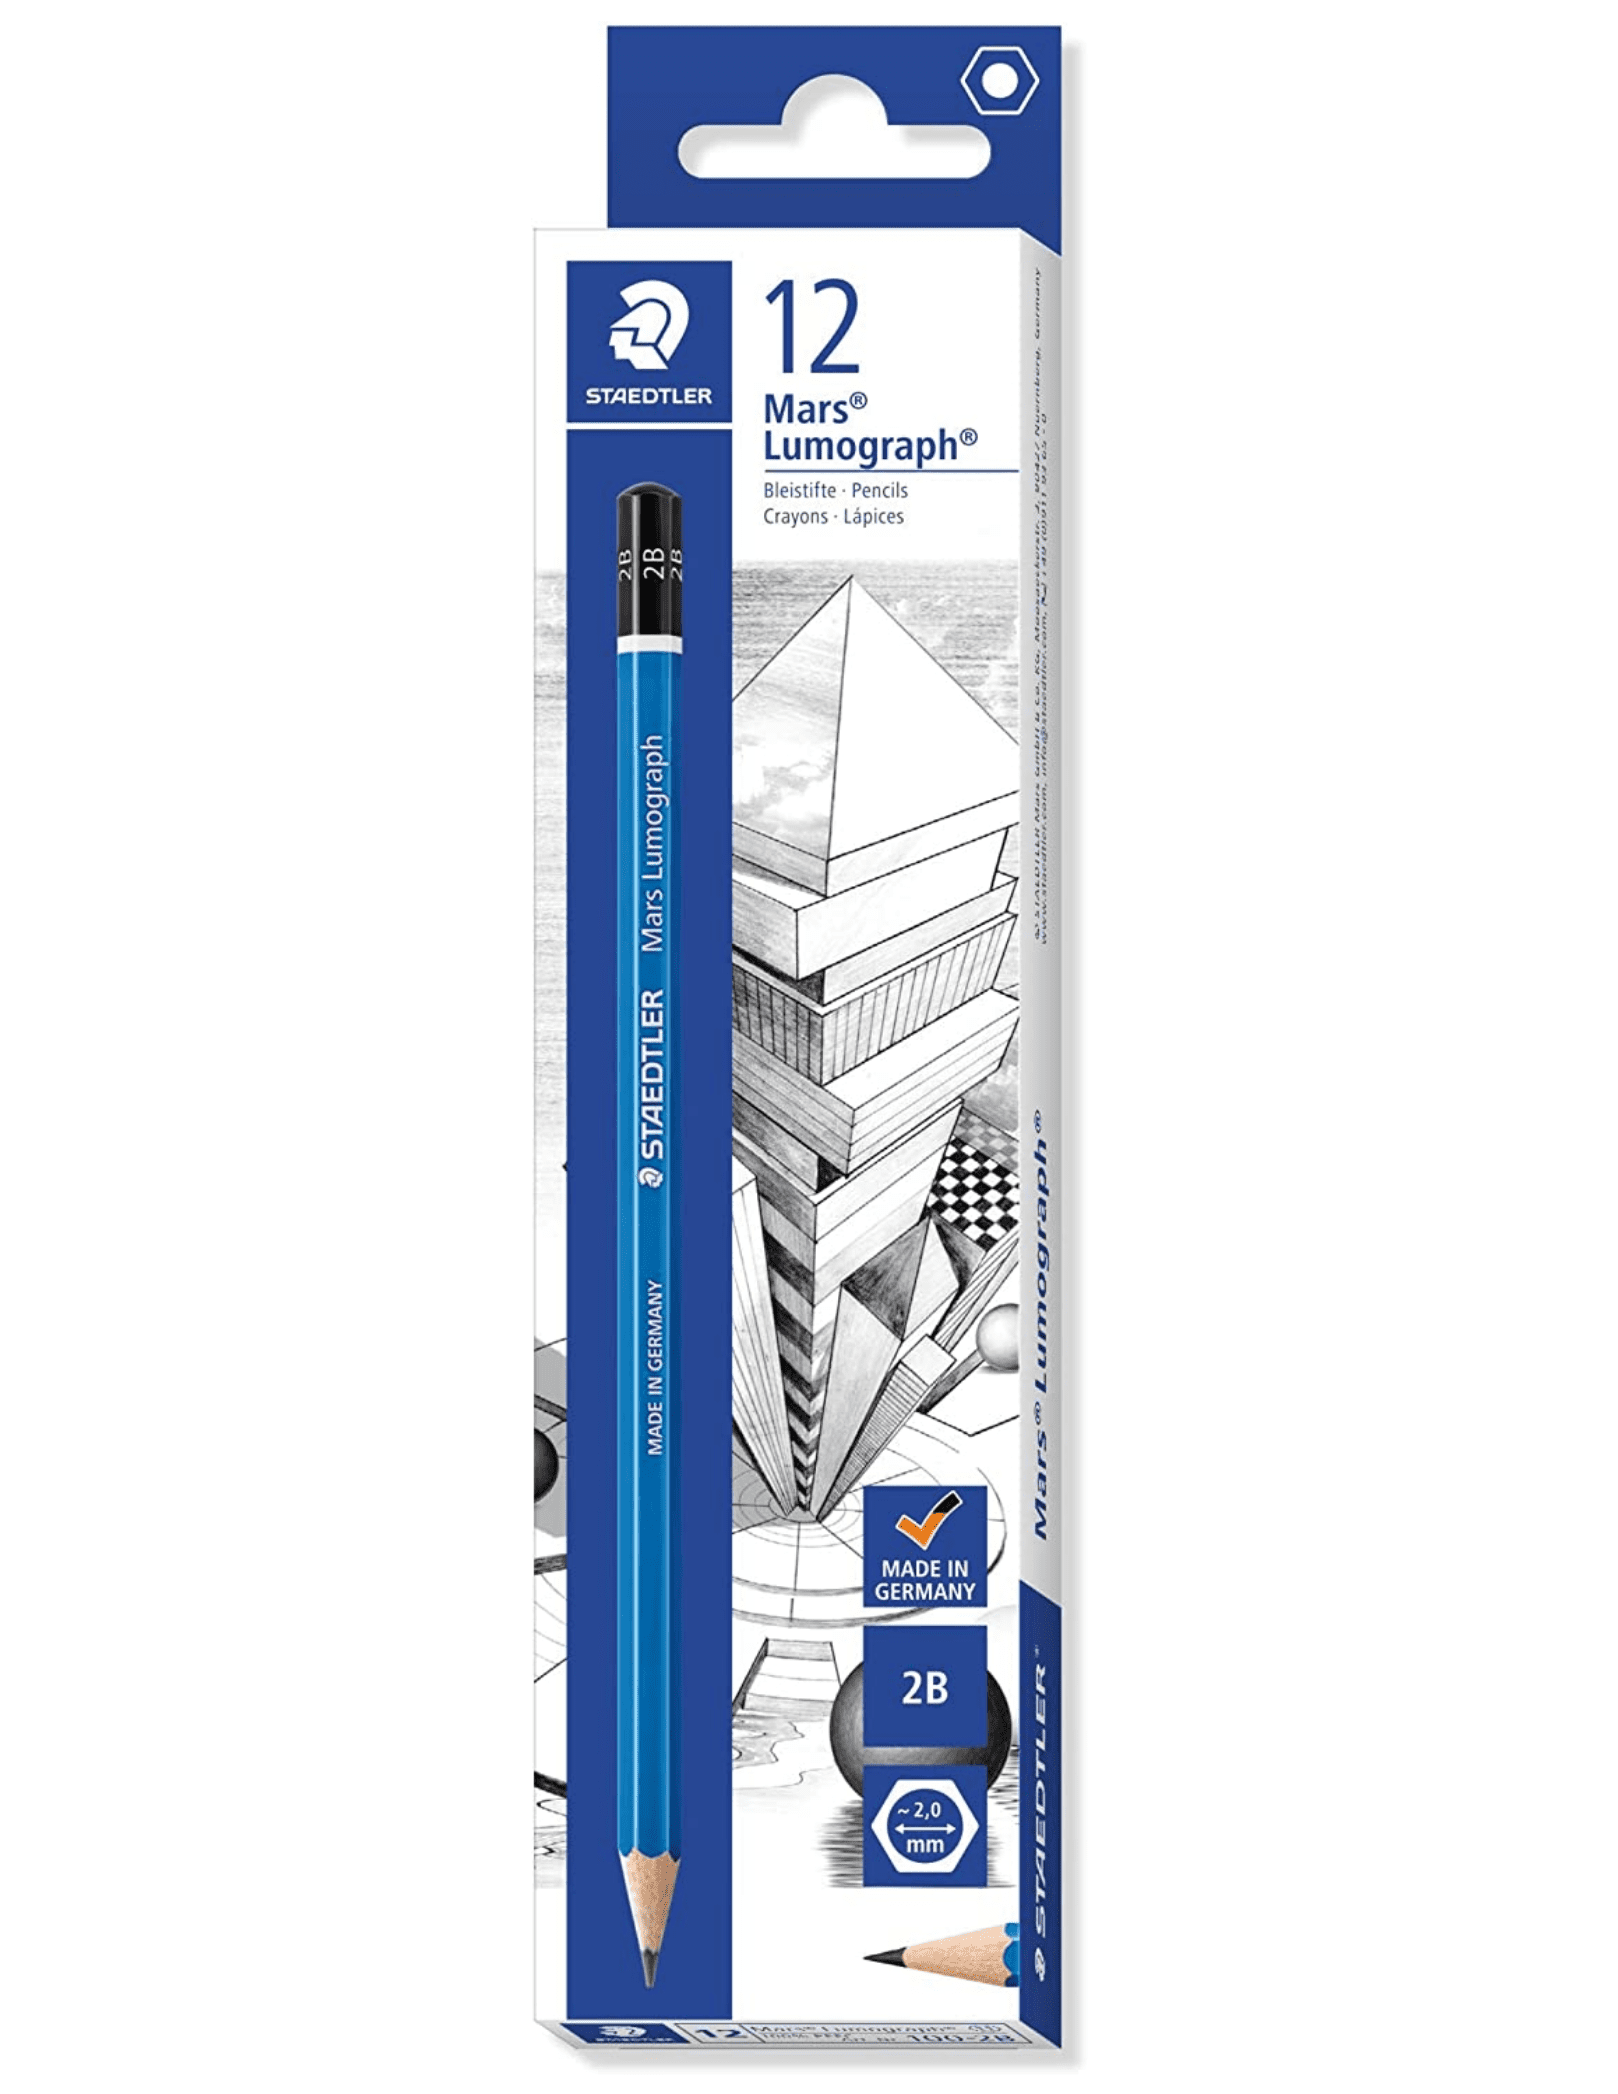 What pencils do I use and recommend?